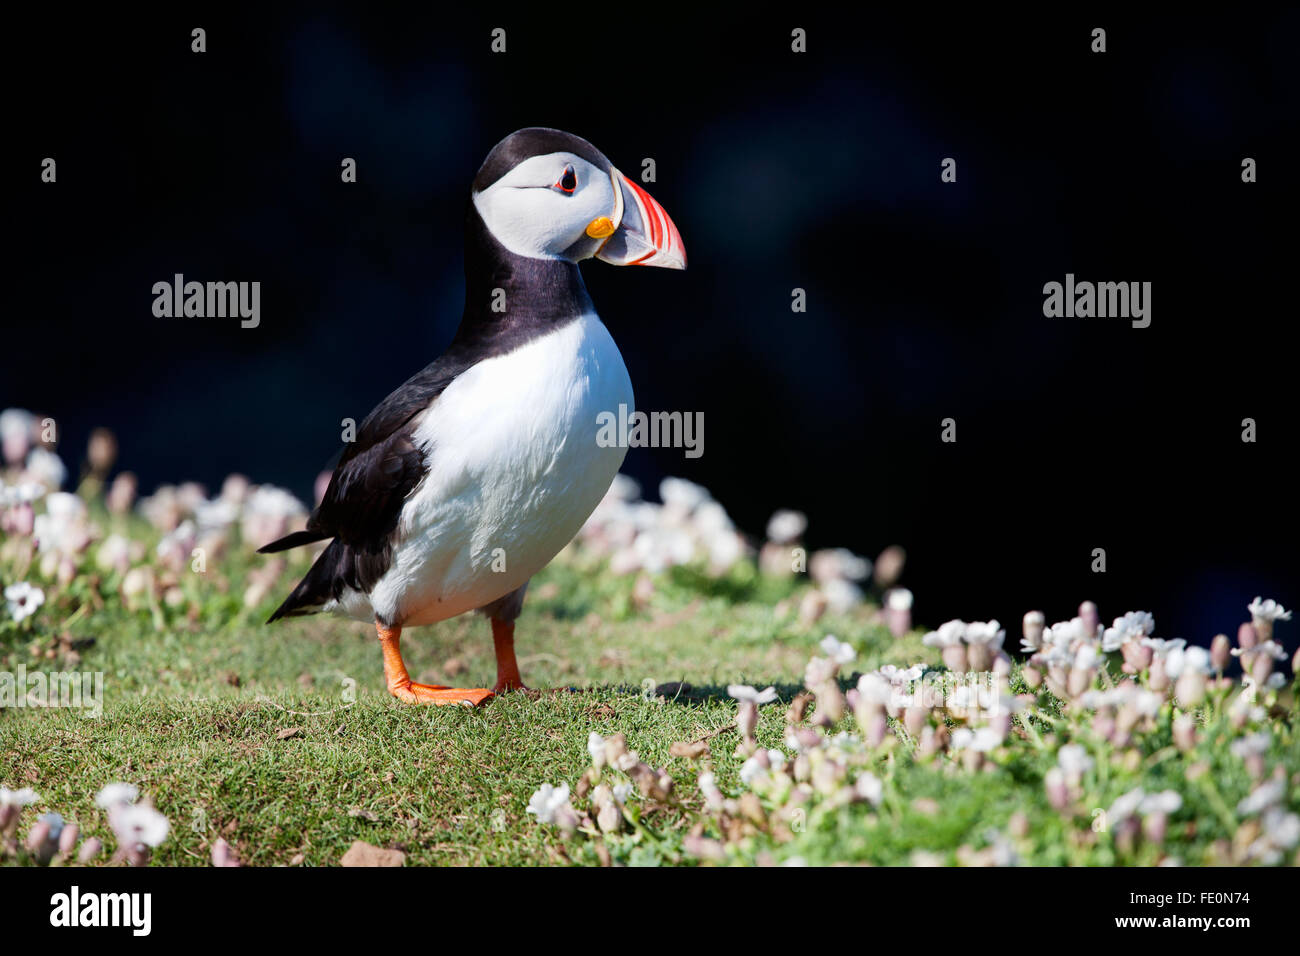 British Isles: A single adult Atlantic puffin, Fratercula Artica, walks across the headland on near the birds nesting site on a warm day. Stock Photo